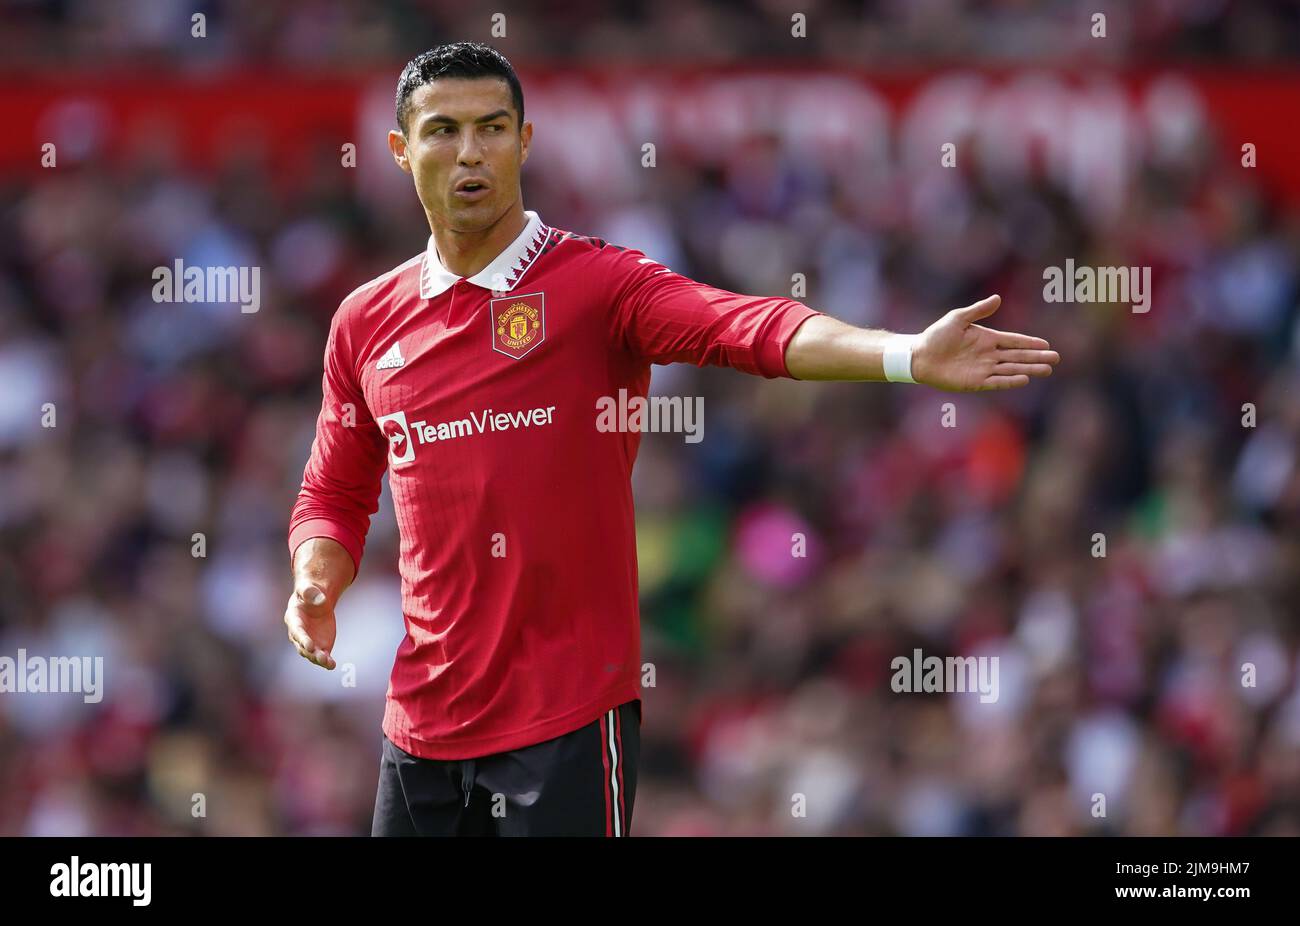 File photo dated 31-07-2022 of Manchester United's Cristiano Ronaldo. Erik ten Hag was coy about Cristiano Ronaldo’s availability for Manchester United’s season opener but reiterated that the wantaway star is part of his plans for the new season. Issue date: Friday August 5, 2022. Stock Photo